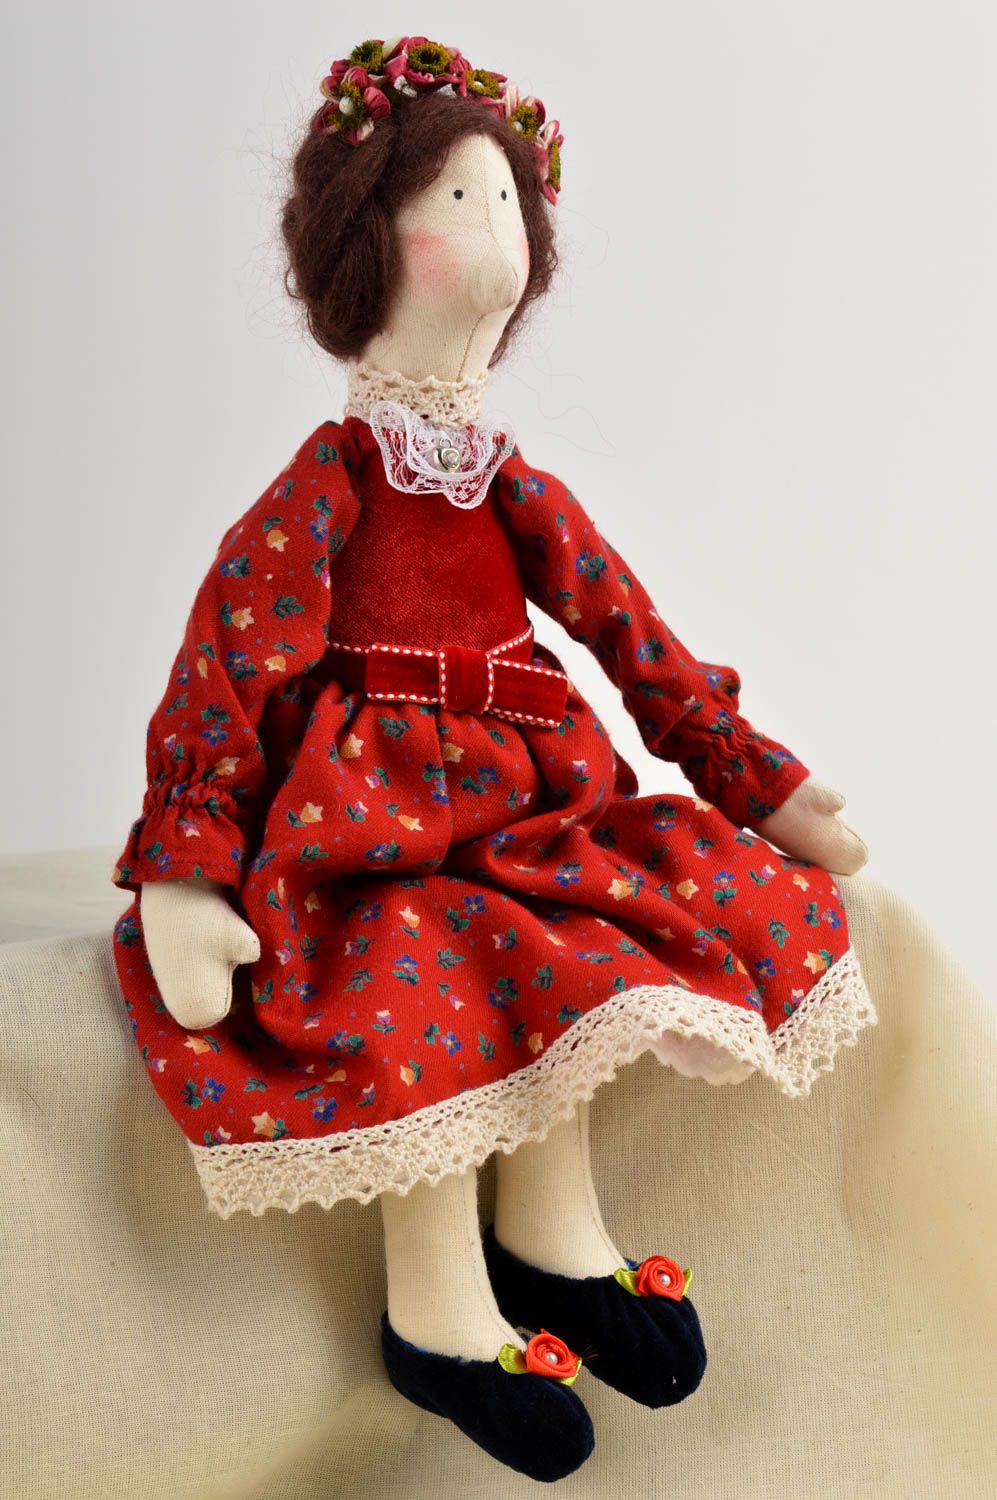 Handmade doll in red dress stuffed toy designer childrens toy decoration ideas photo 1